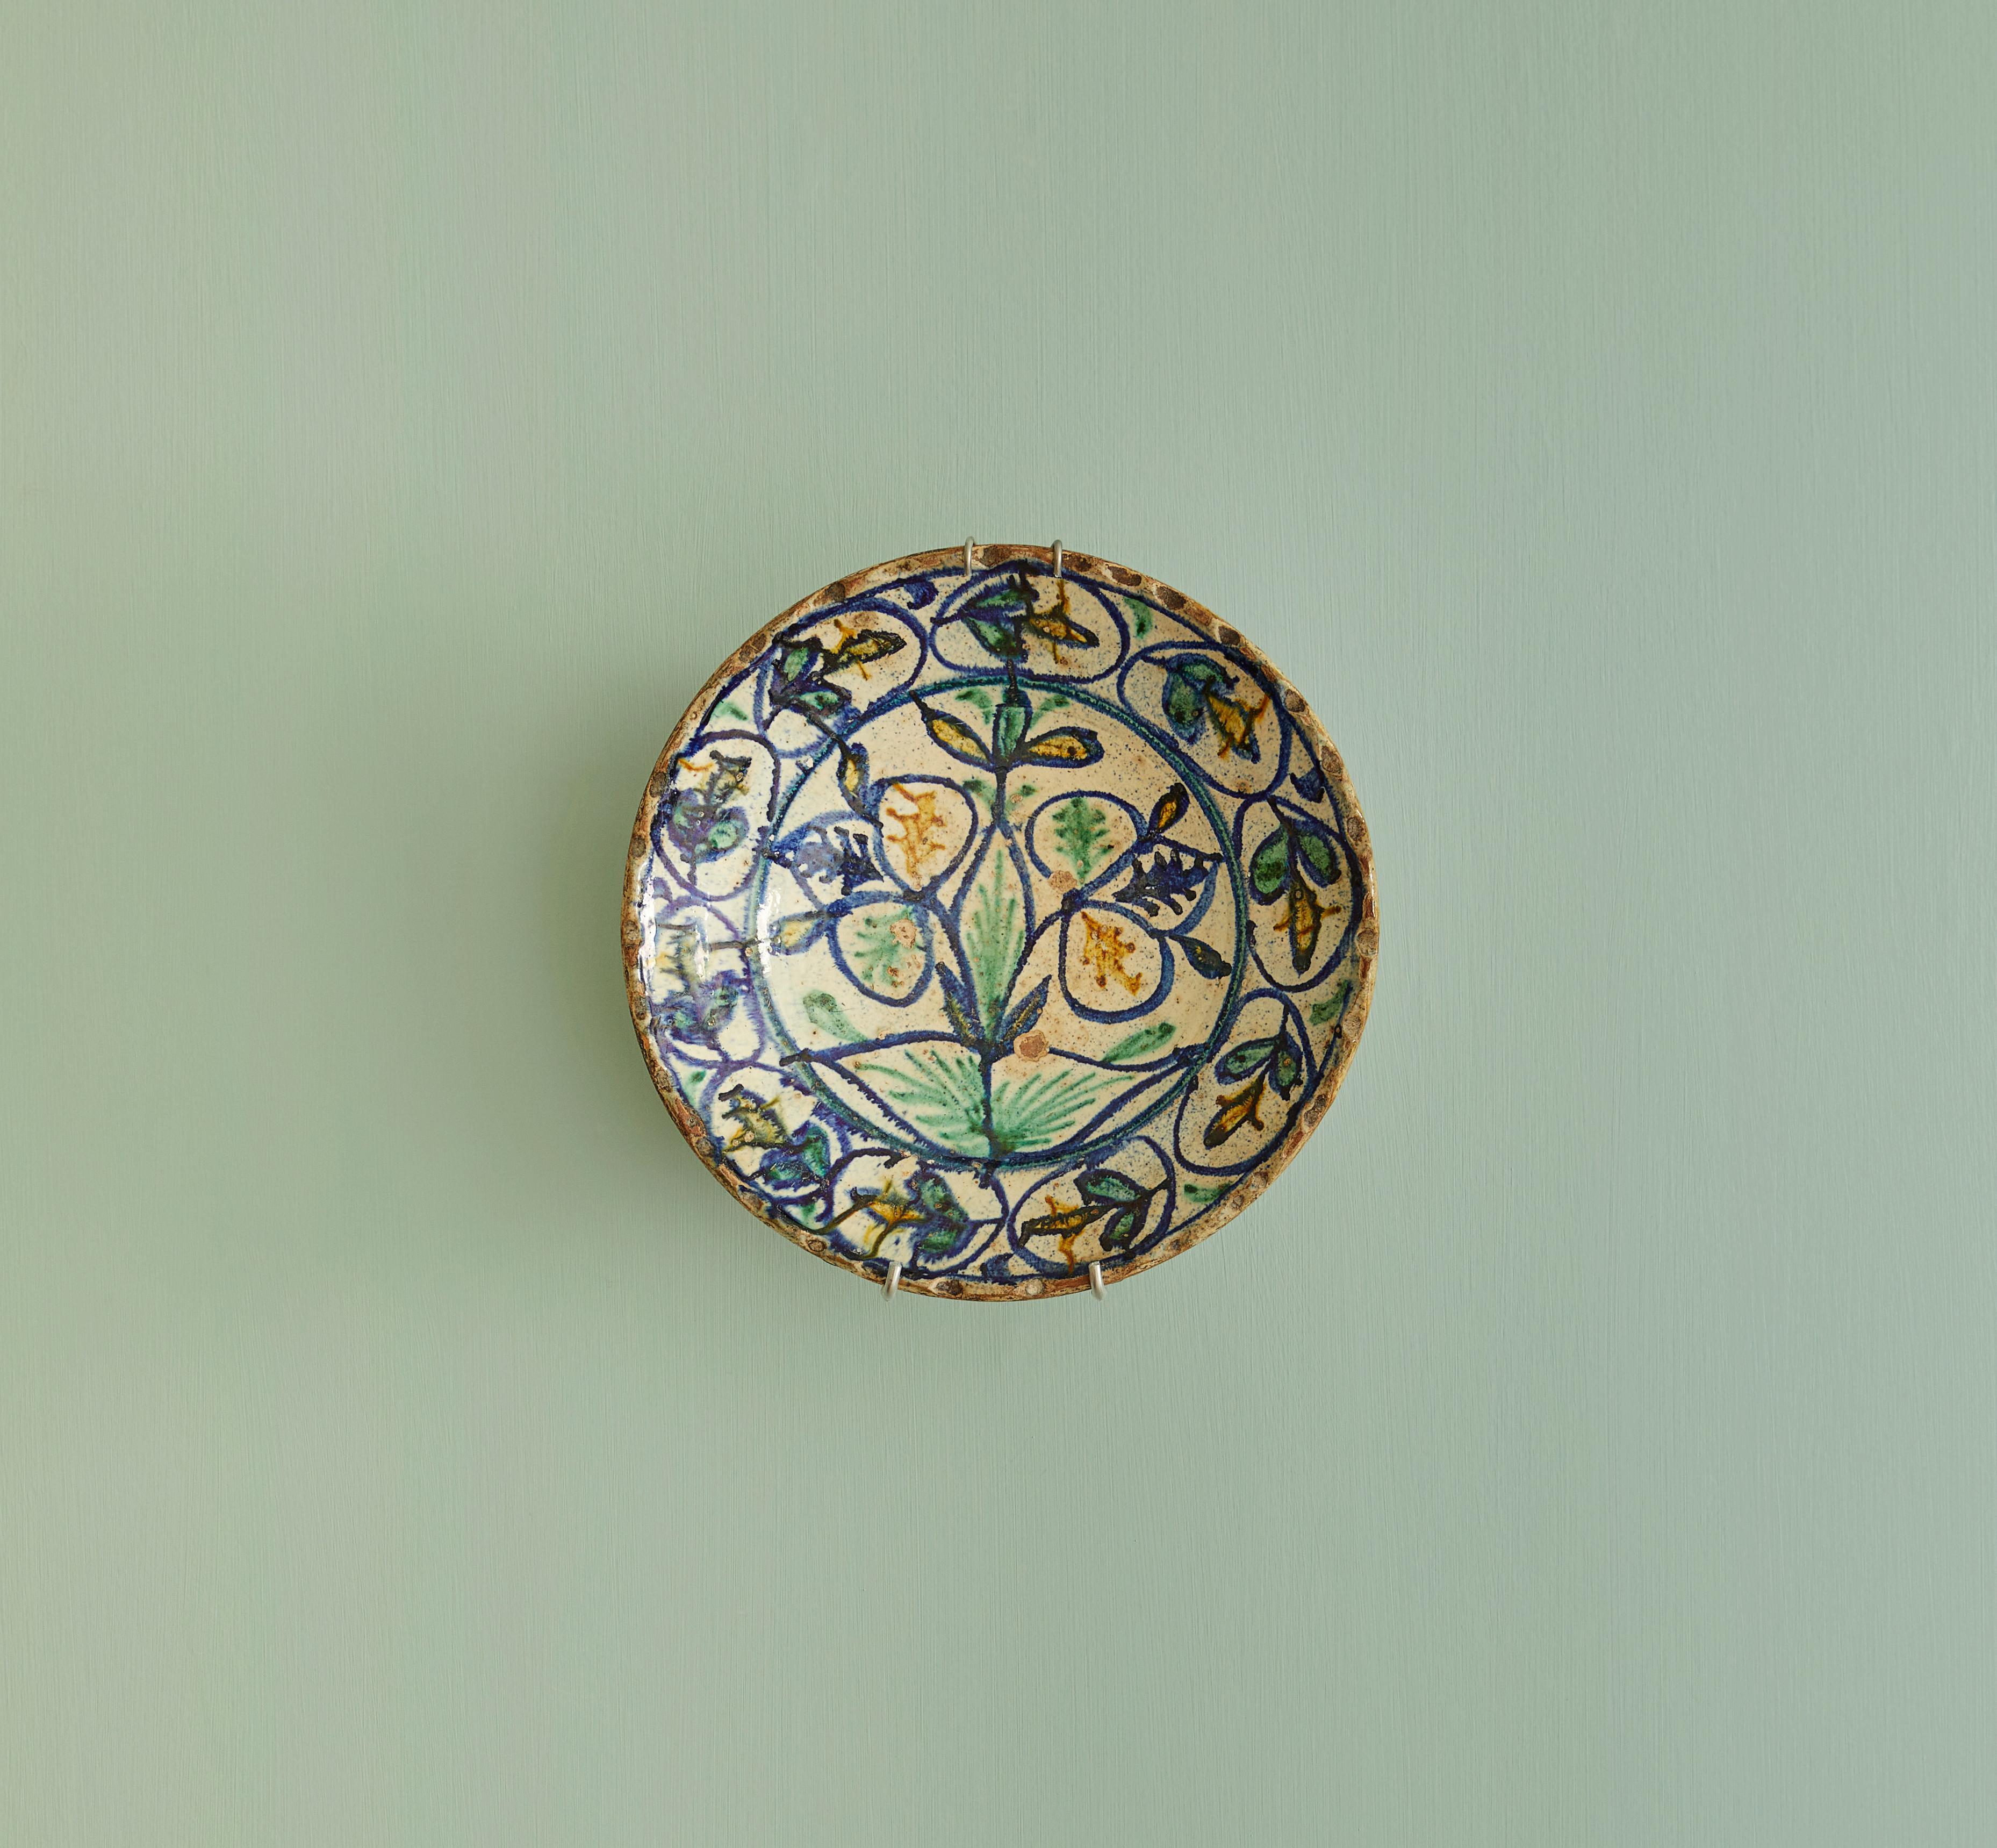 Afghanistan, 19th century.

A Ceramic hanging platter with painted details with blue, green and yellow details.

Measures: Ø 27 x D 8 cm.